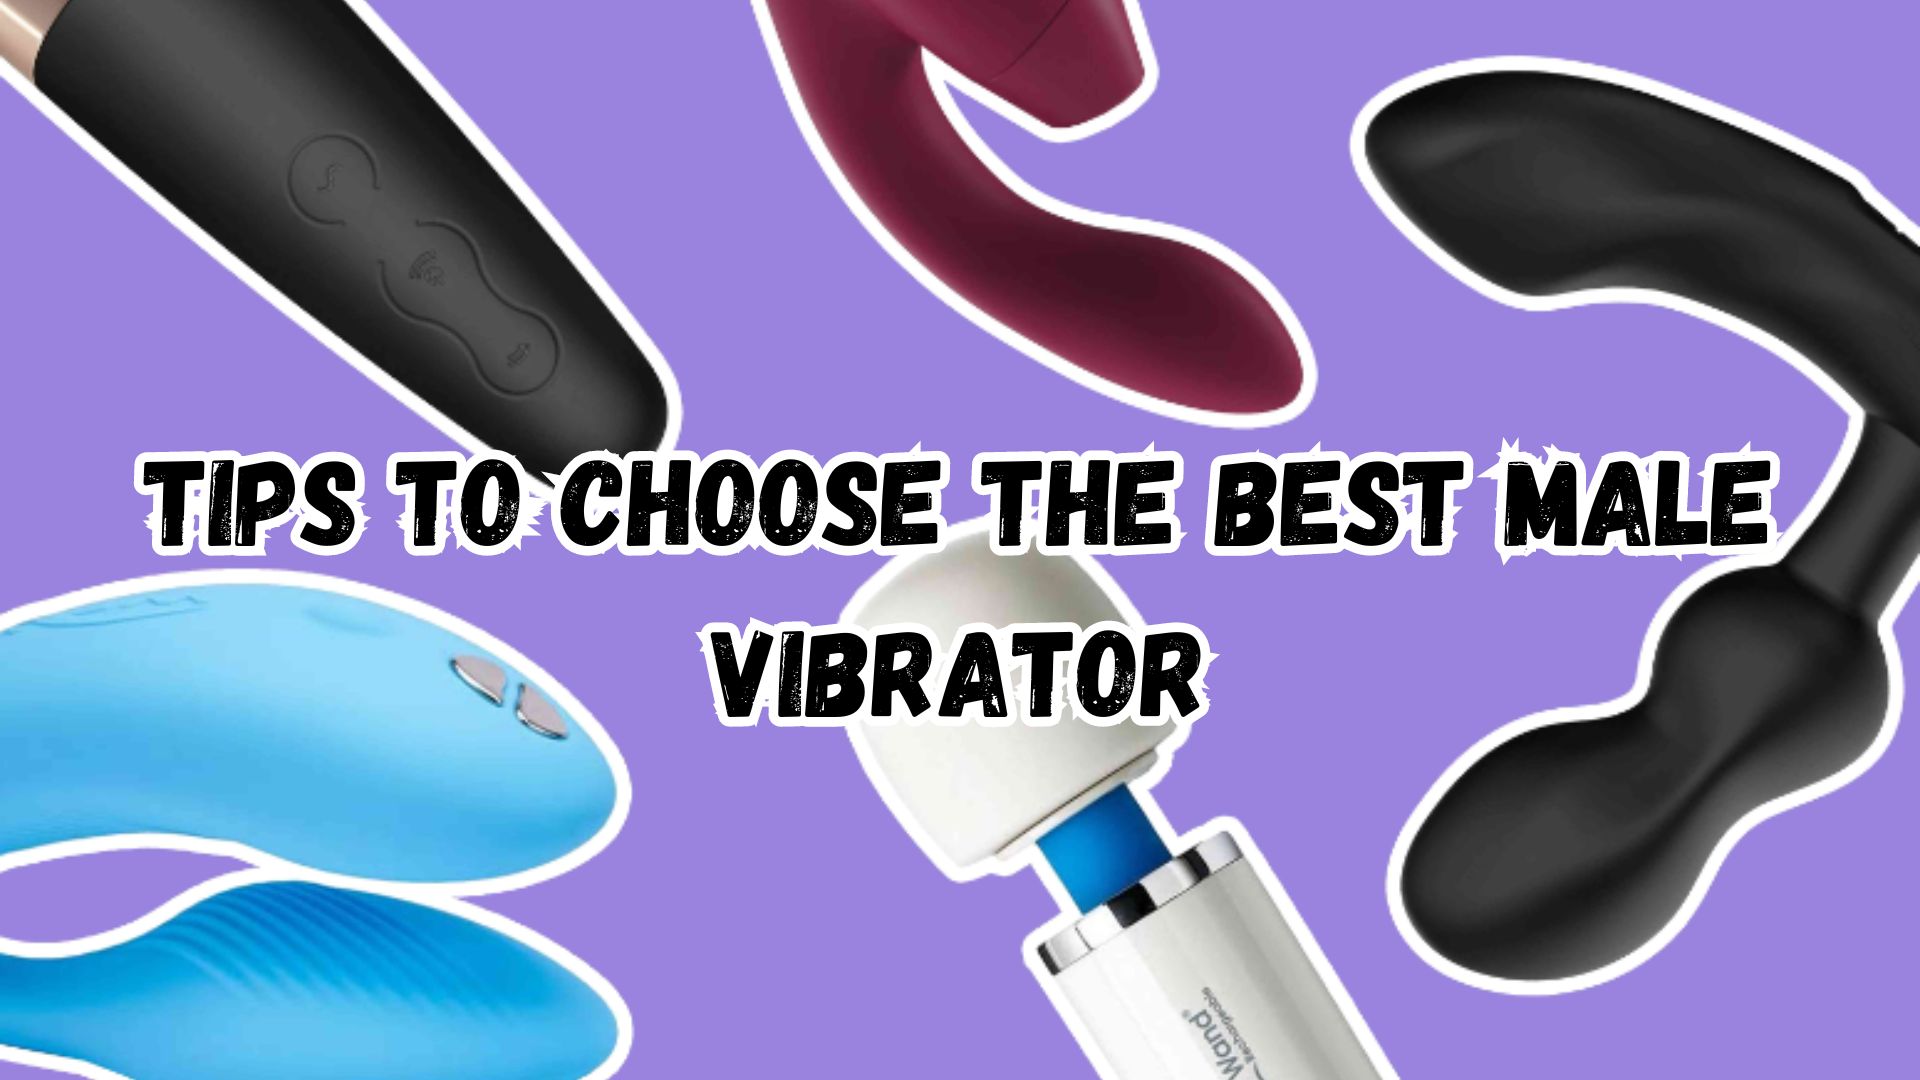 Tips To Choose The Best Male Vibrator